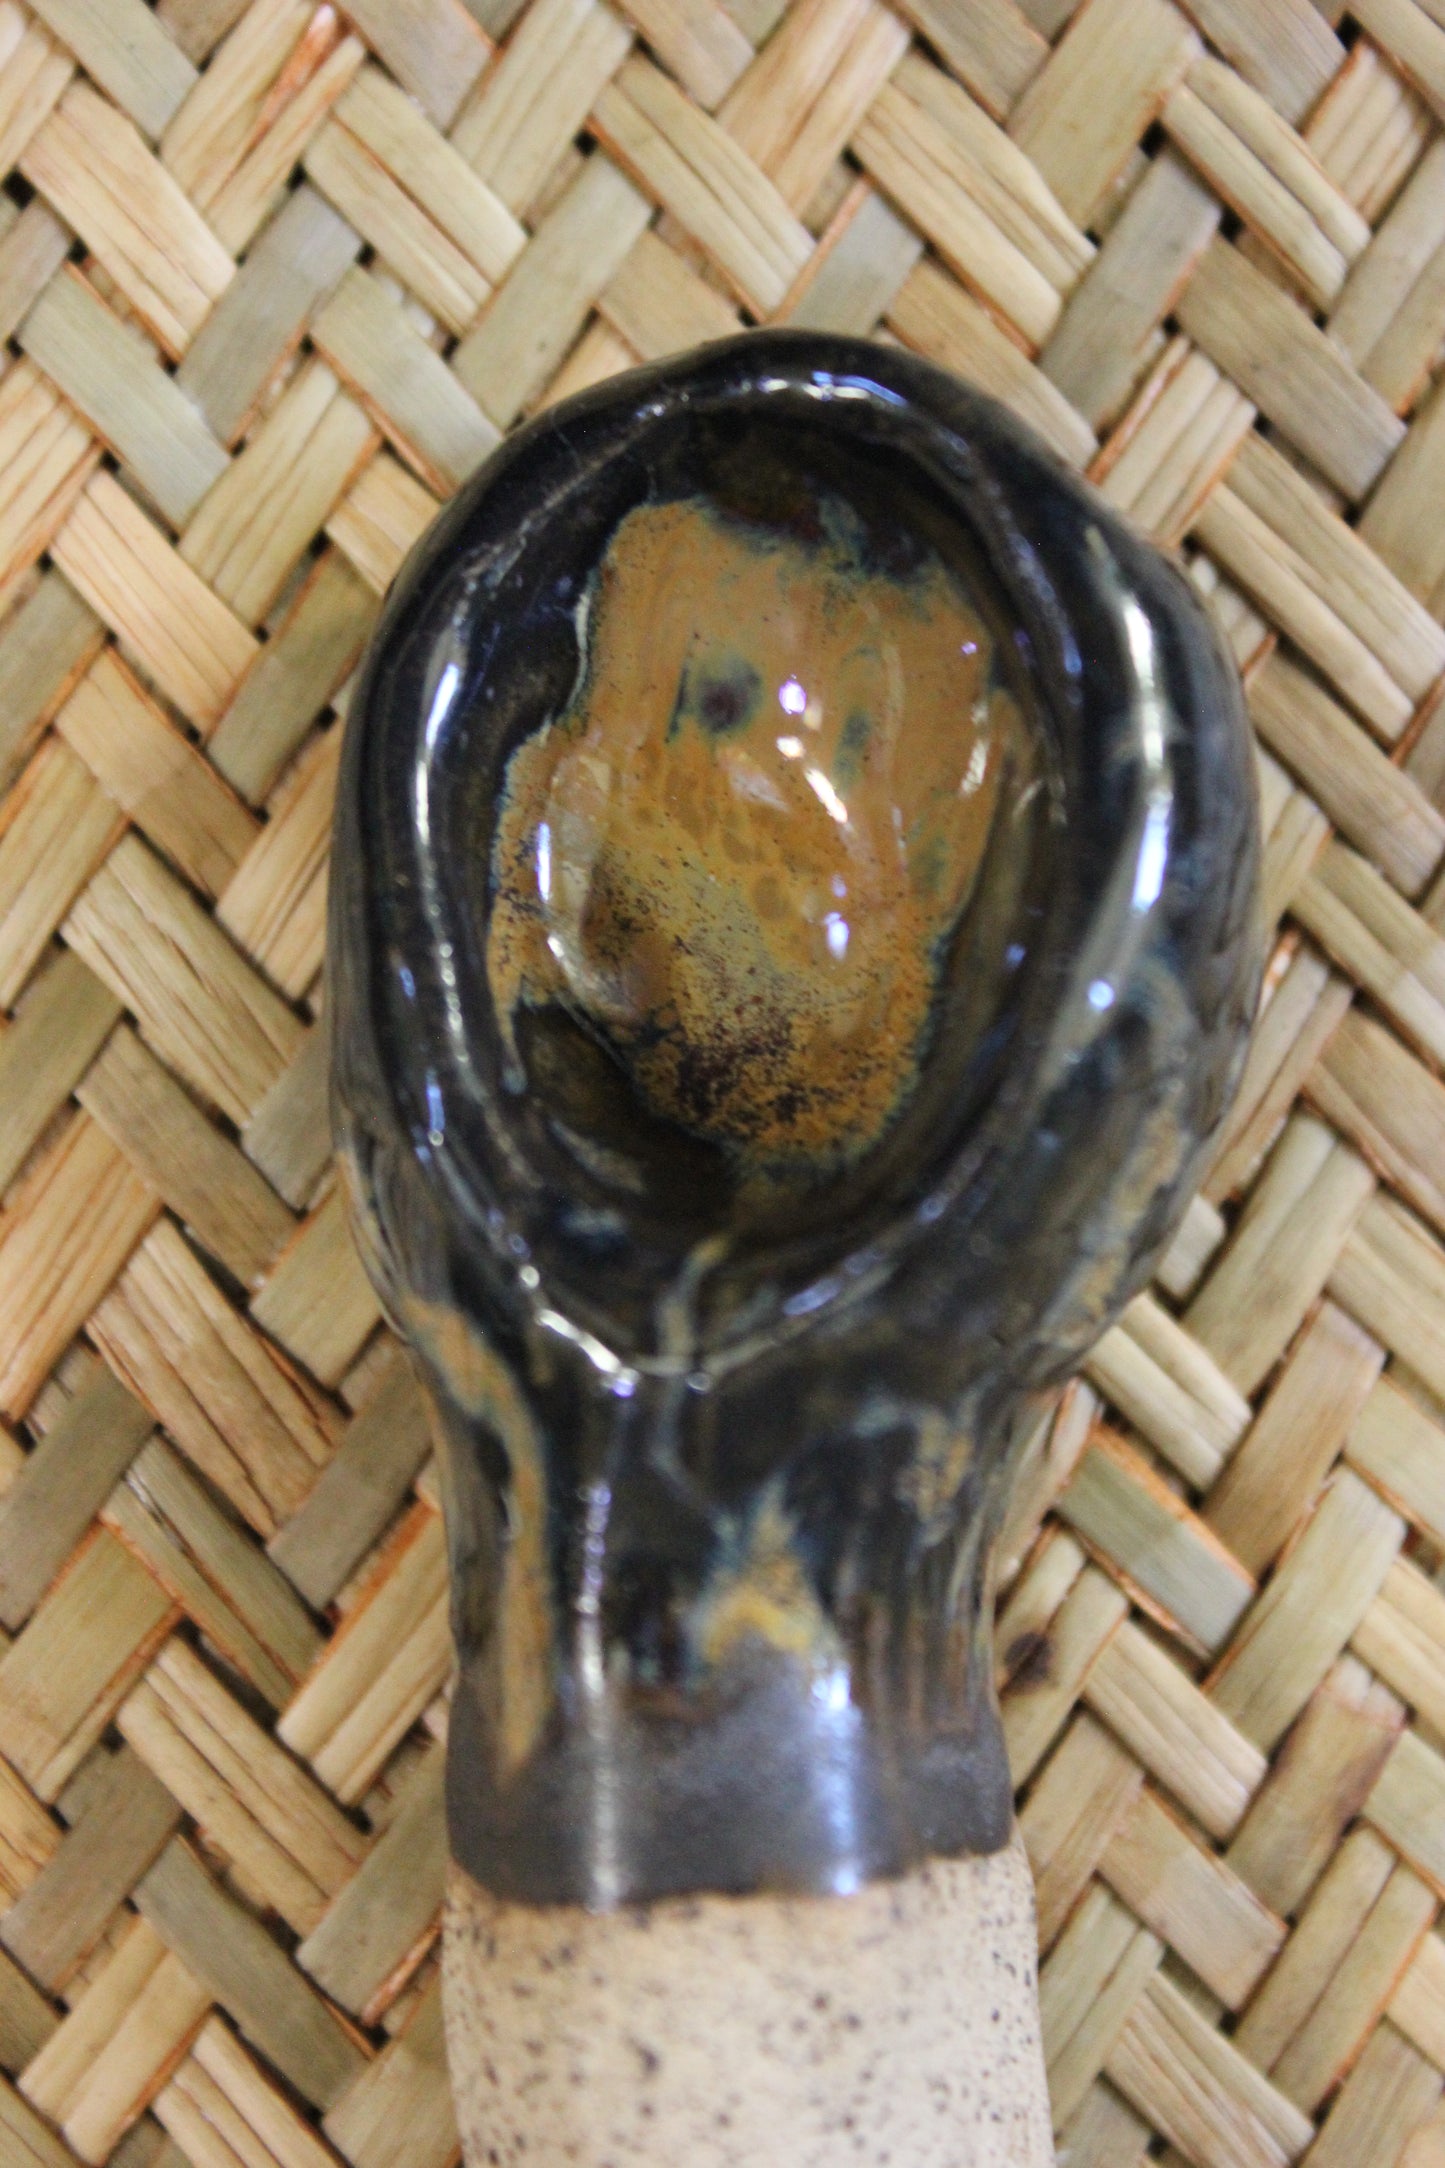 Earthy Ceramic Black-Carmel Serving Spoon as a Unique Ornament or for Food Consumption